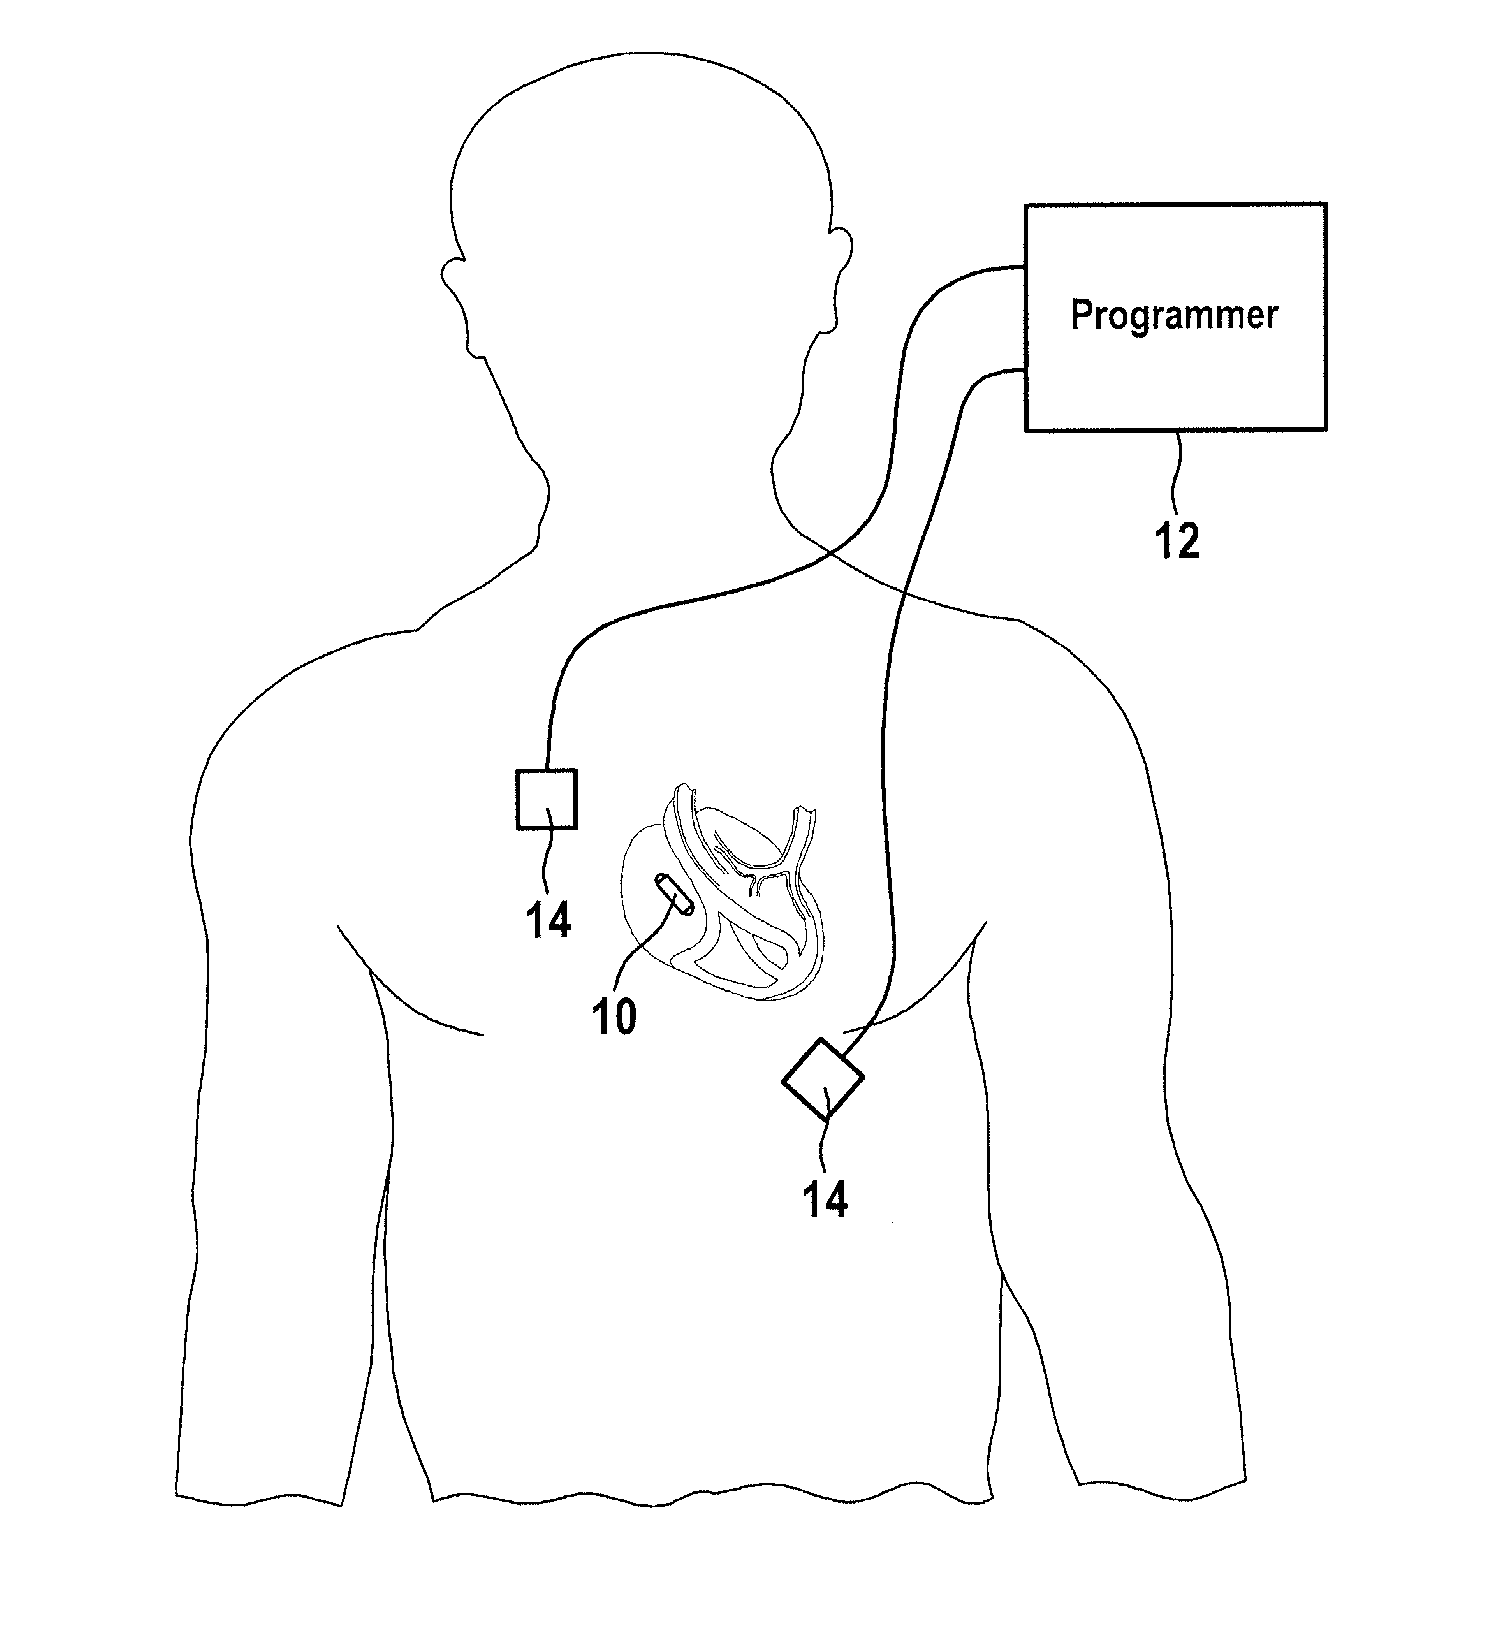 Implantable medical device, medical system and method for data communication